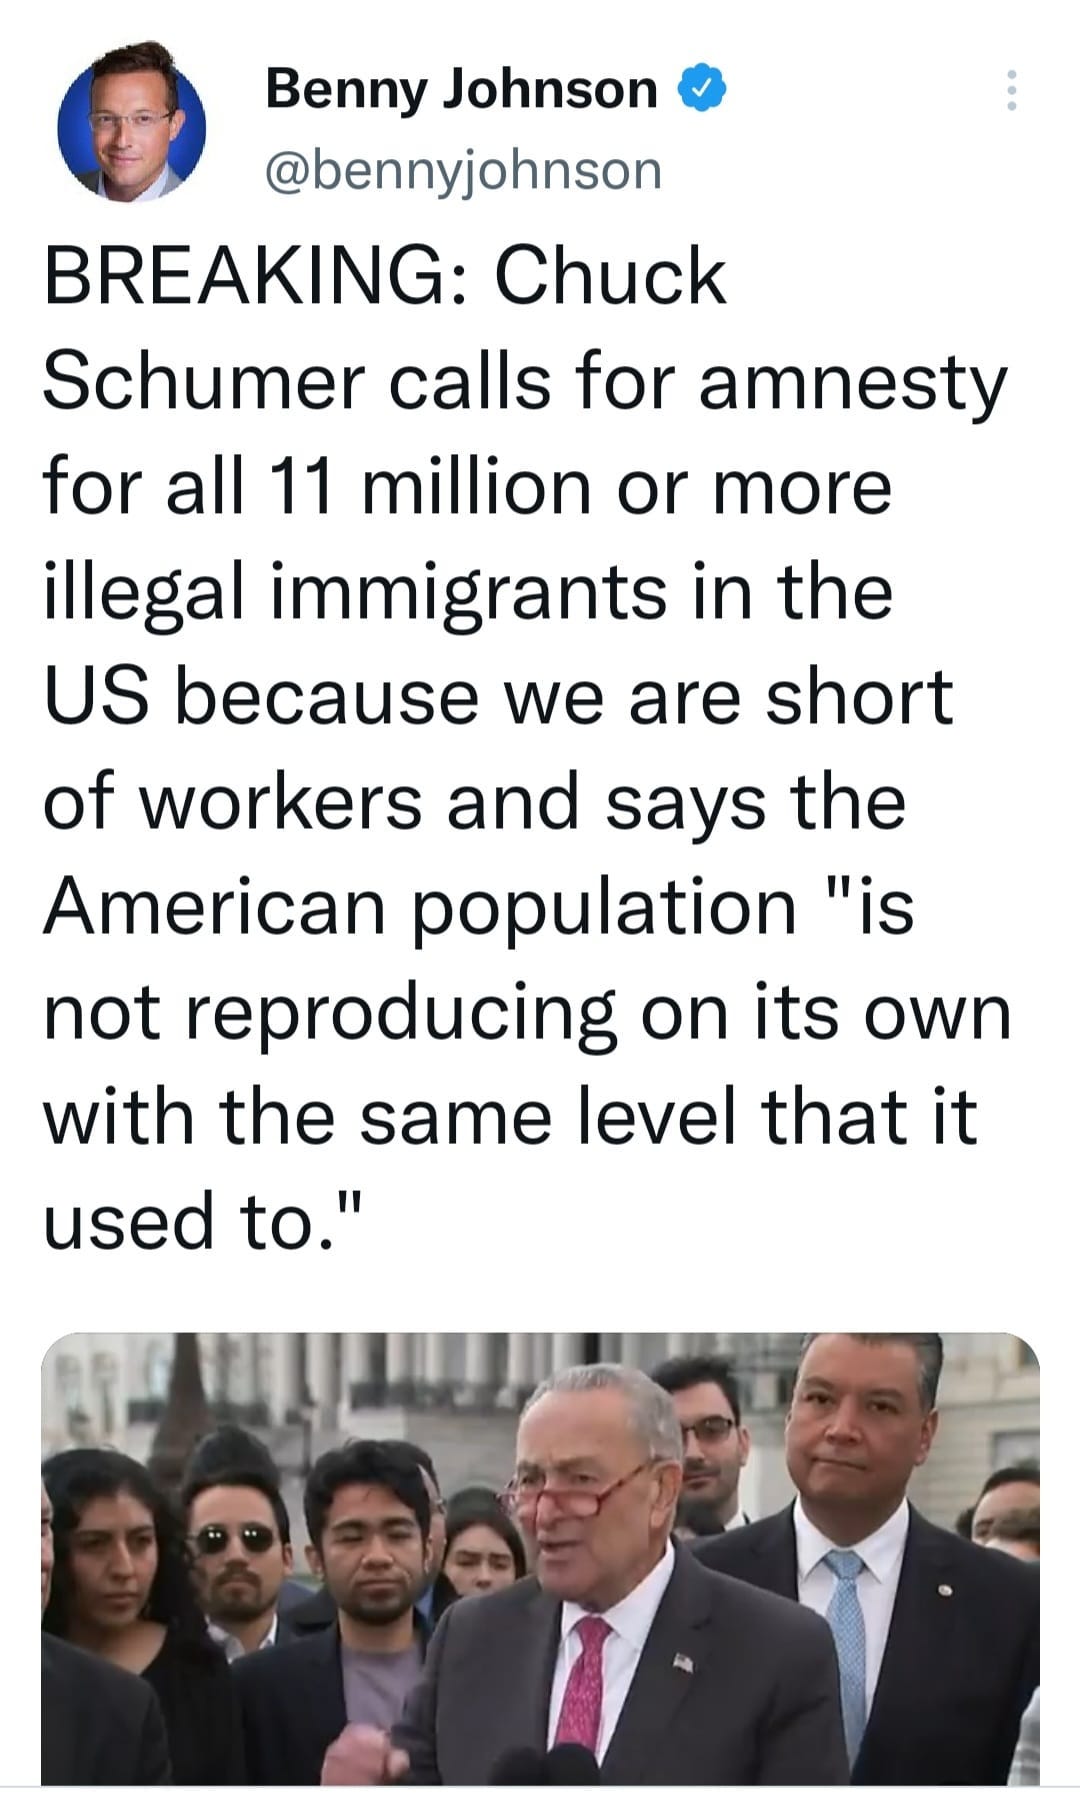 May be an image of 5 people and text that says 'Benny Johnsor @bennyjohnson BREAKING: Chuck Schumer calls for amnesty for all 11 million or more illegal immigrants in the US because we are short of workers and says the American population "is not reproducing on its own with the same level that it used to."'